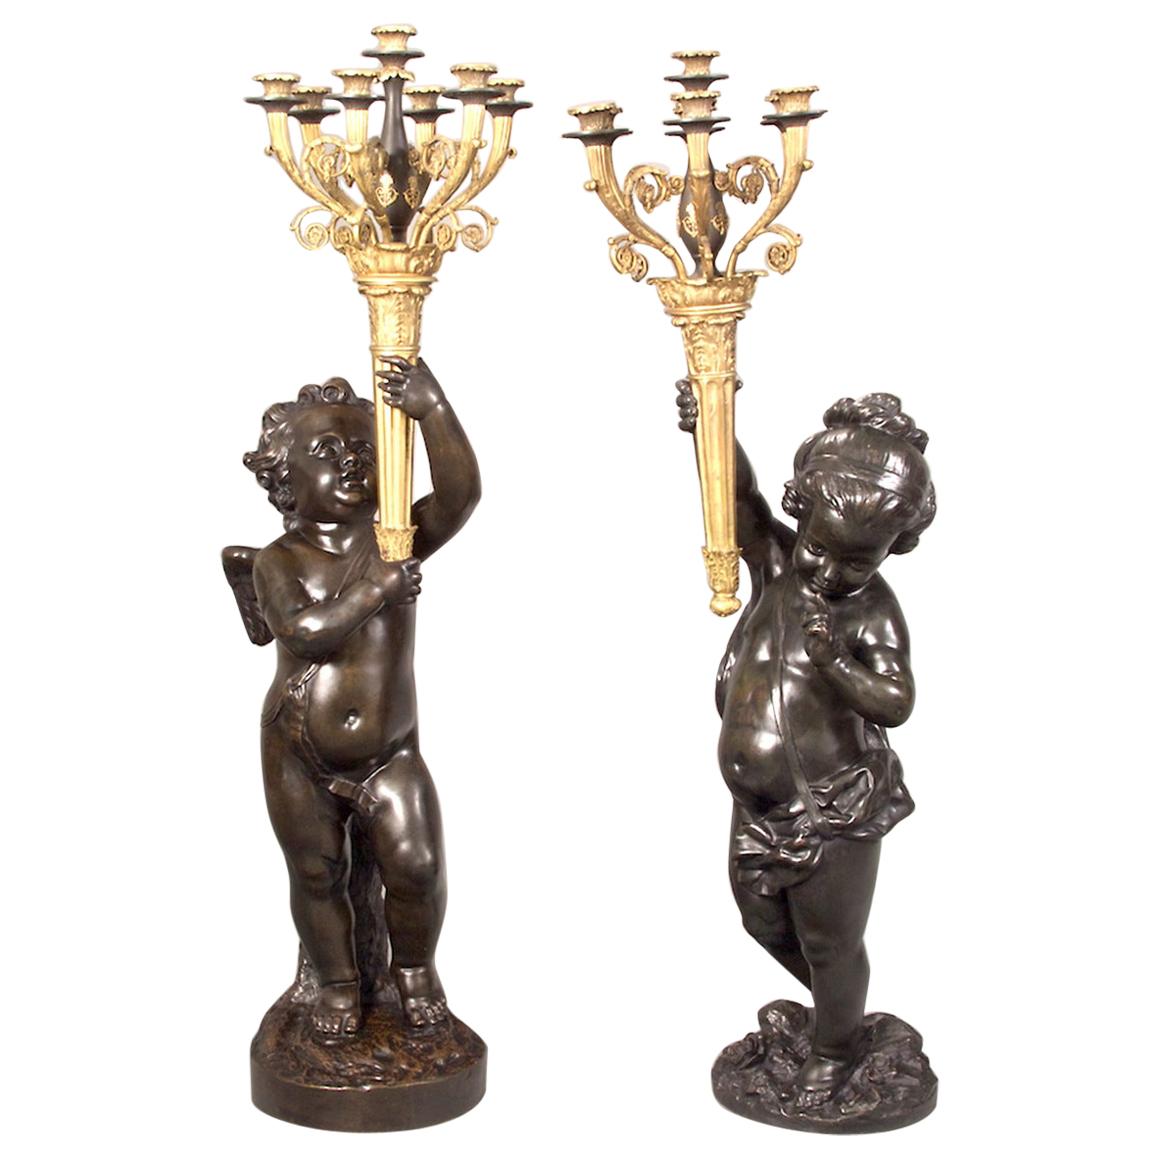 A pair of important monumental gilt and patinated bronze Putti Torchères and marble pedestals.
 
Origin: France 
Date: circa 1890 
Dimension: 48 in. x 11 in. (Figures); 42 3/4 in. x 13 in. (Pedestal)